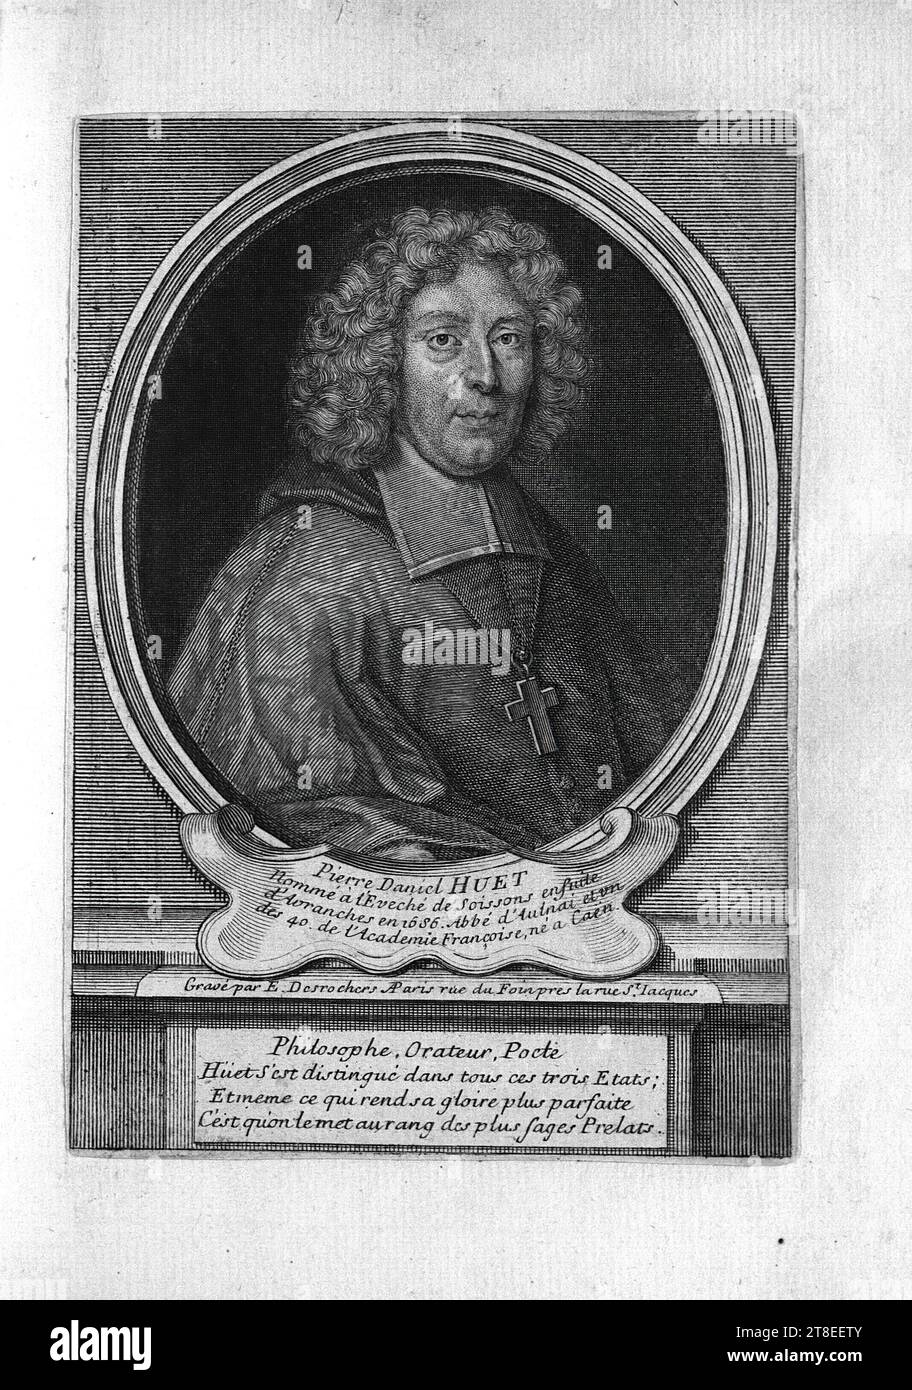 Pierre Daniel HUET Appointed to the Bishopric of Soissons and then of Avranches in 1686. Abbot of Aulnai and one of the 40. of the French Academy, born in Caen. Engraved by E. Desrochers AParis rue du Foin near rue St.Iacques. Philosopher, Orator, Pocte Hüet distinguished himself in all these three states; And even what makes his glory more perfect is that he is put in the rank of the wisest Prelates Stock Photo